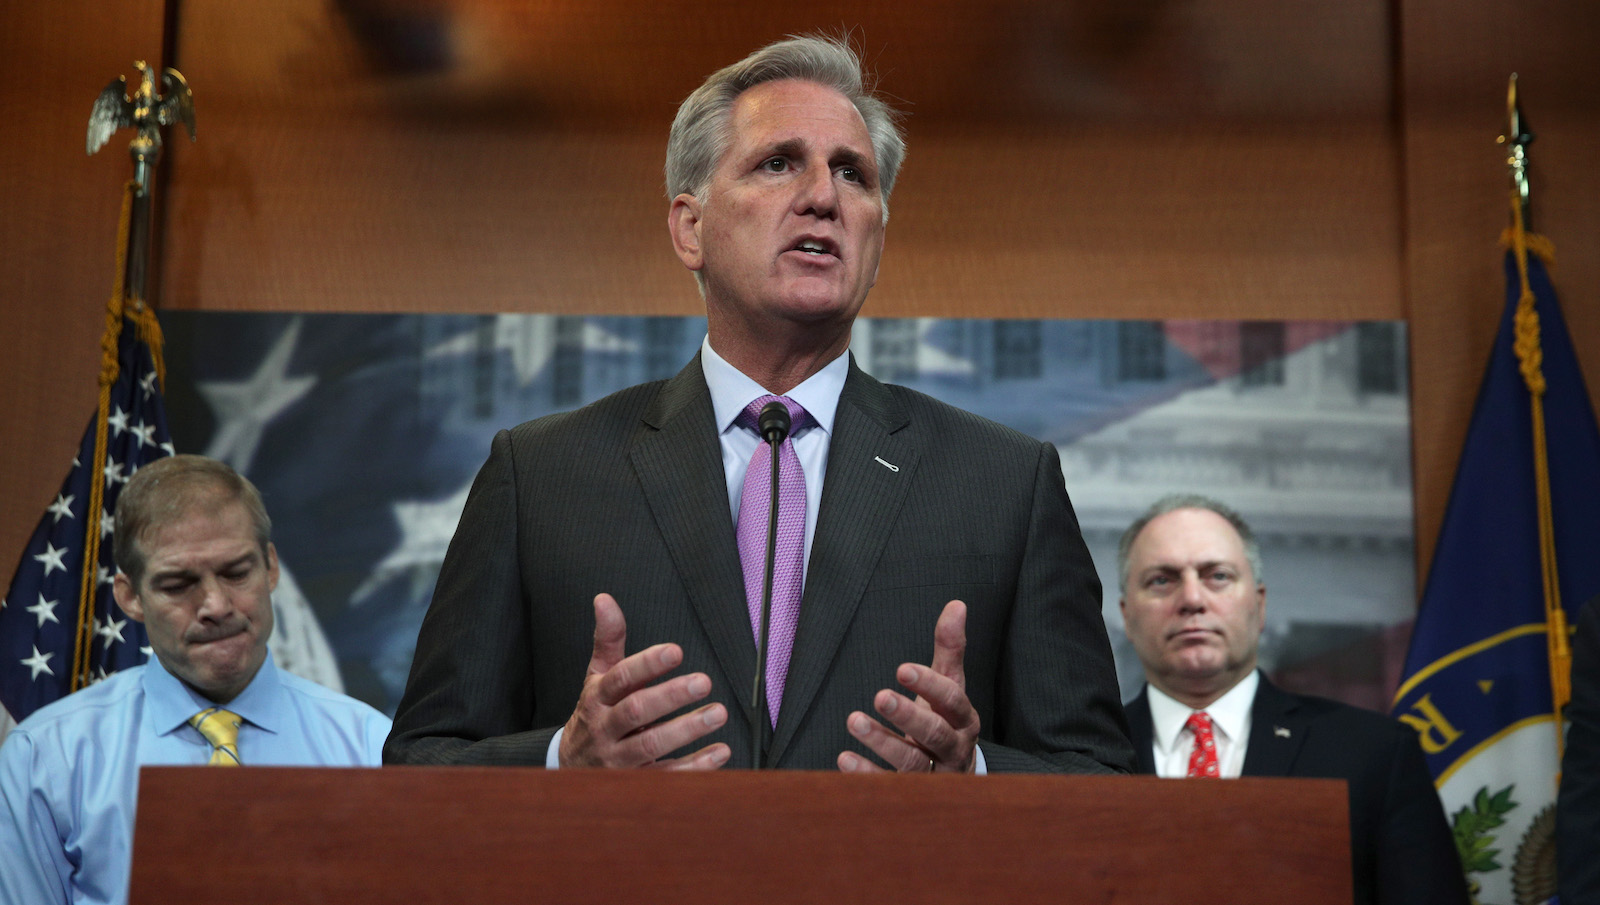 Kevin McCarthy stands at a podium speaking.